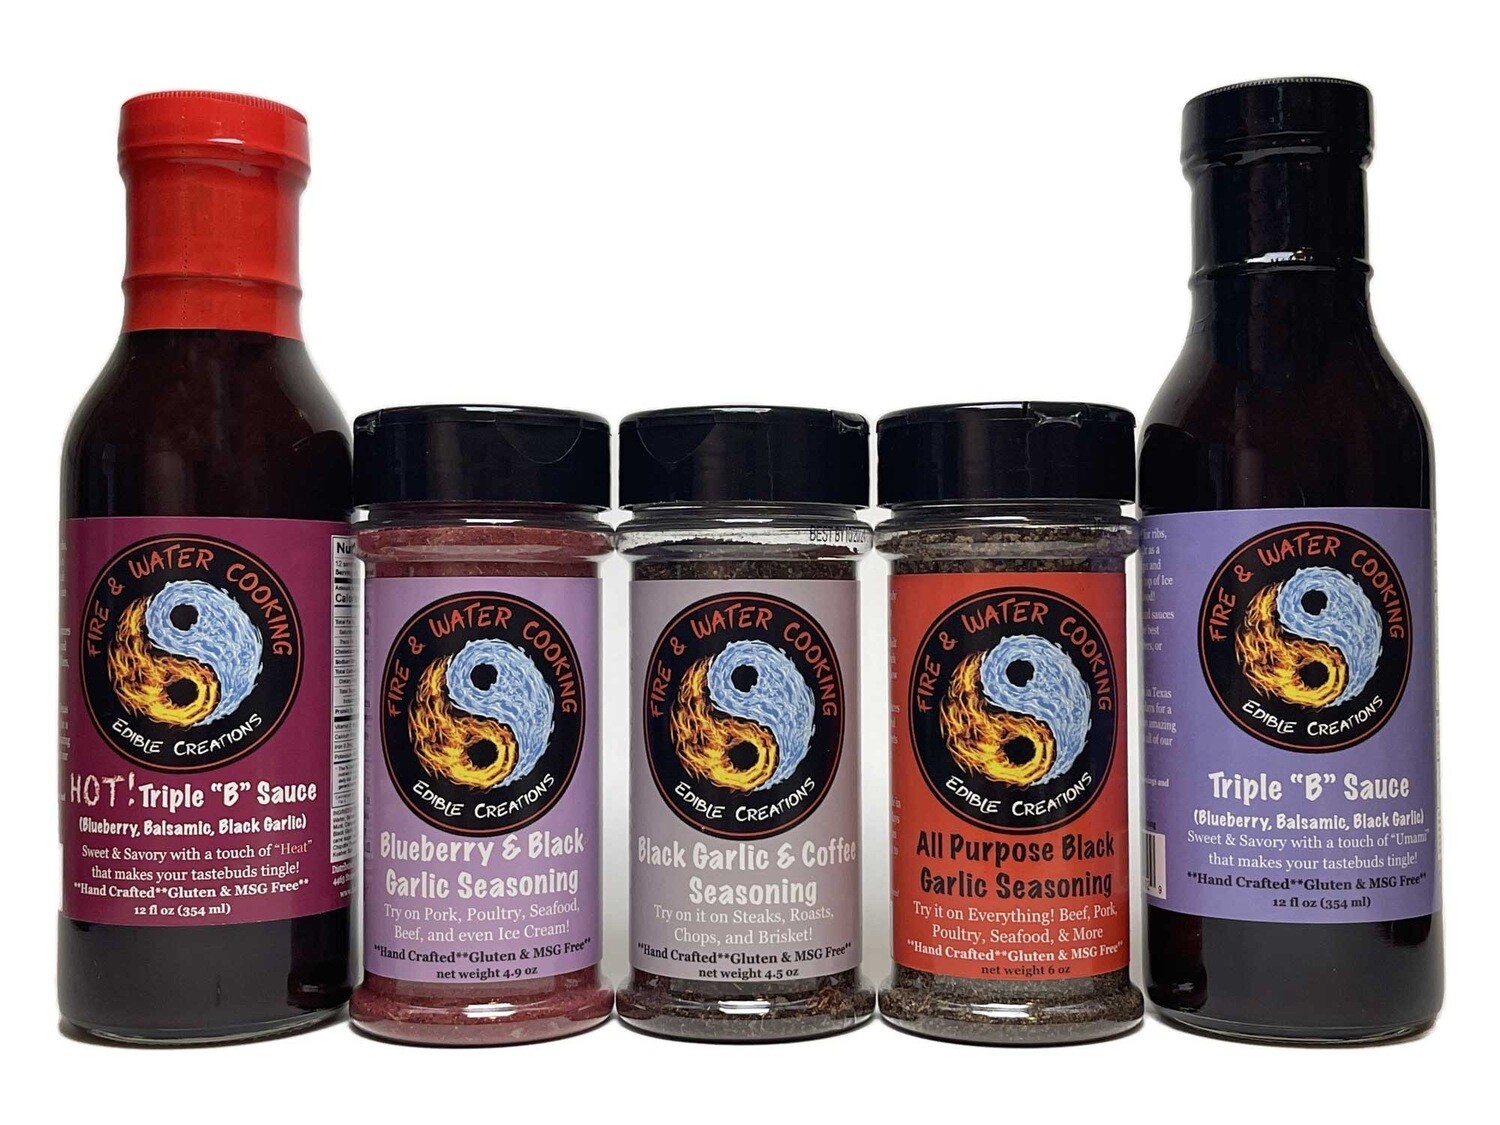 All 3 Fire & Water Cooking Seasonings and 2 Sauces